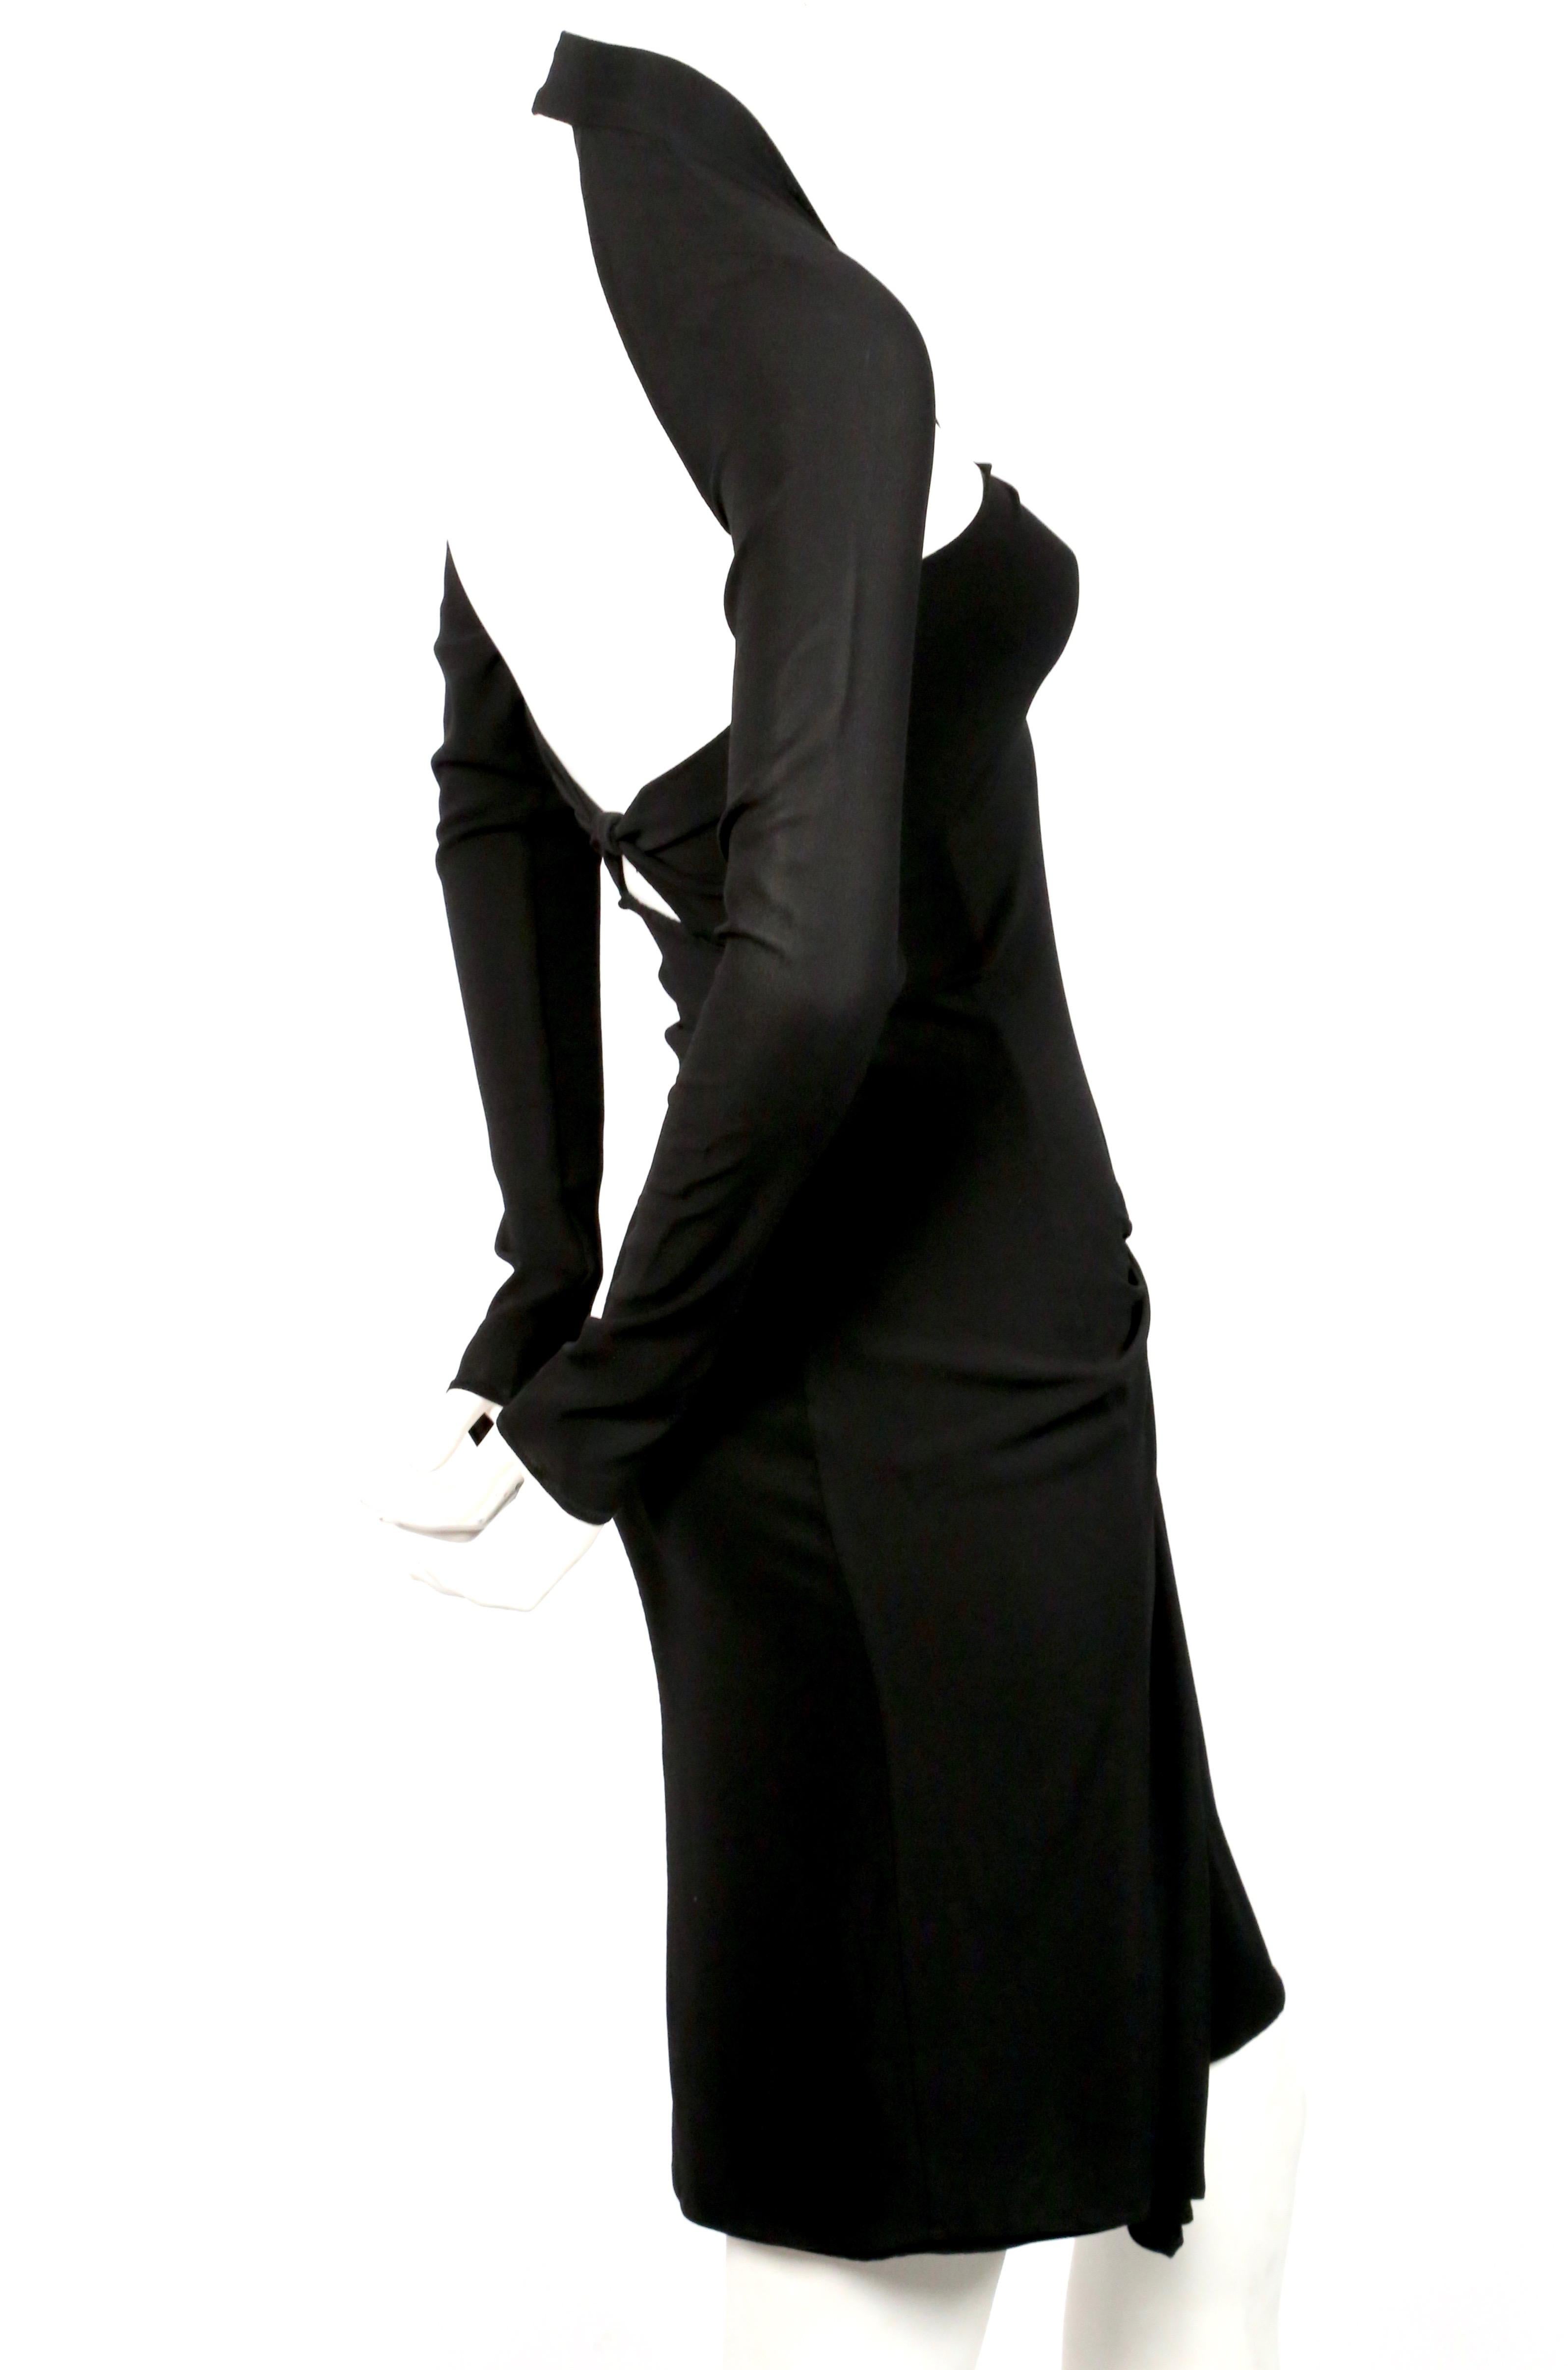 Slinky, jet-black, silk dress with cut-outs at bodice and ruching at hip designed by Tom Ford for Gucci dating to 2003. Italian size 40. Best fits a US 2-4. Approximate measurements: bust 29